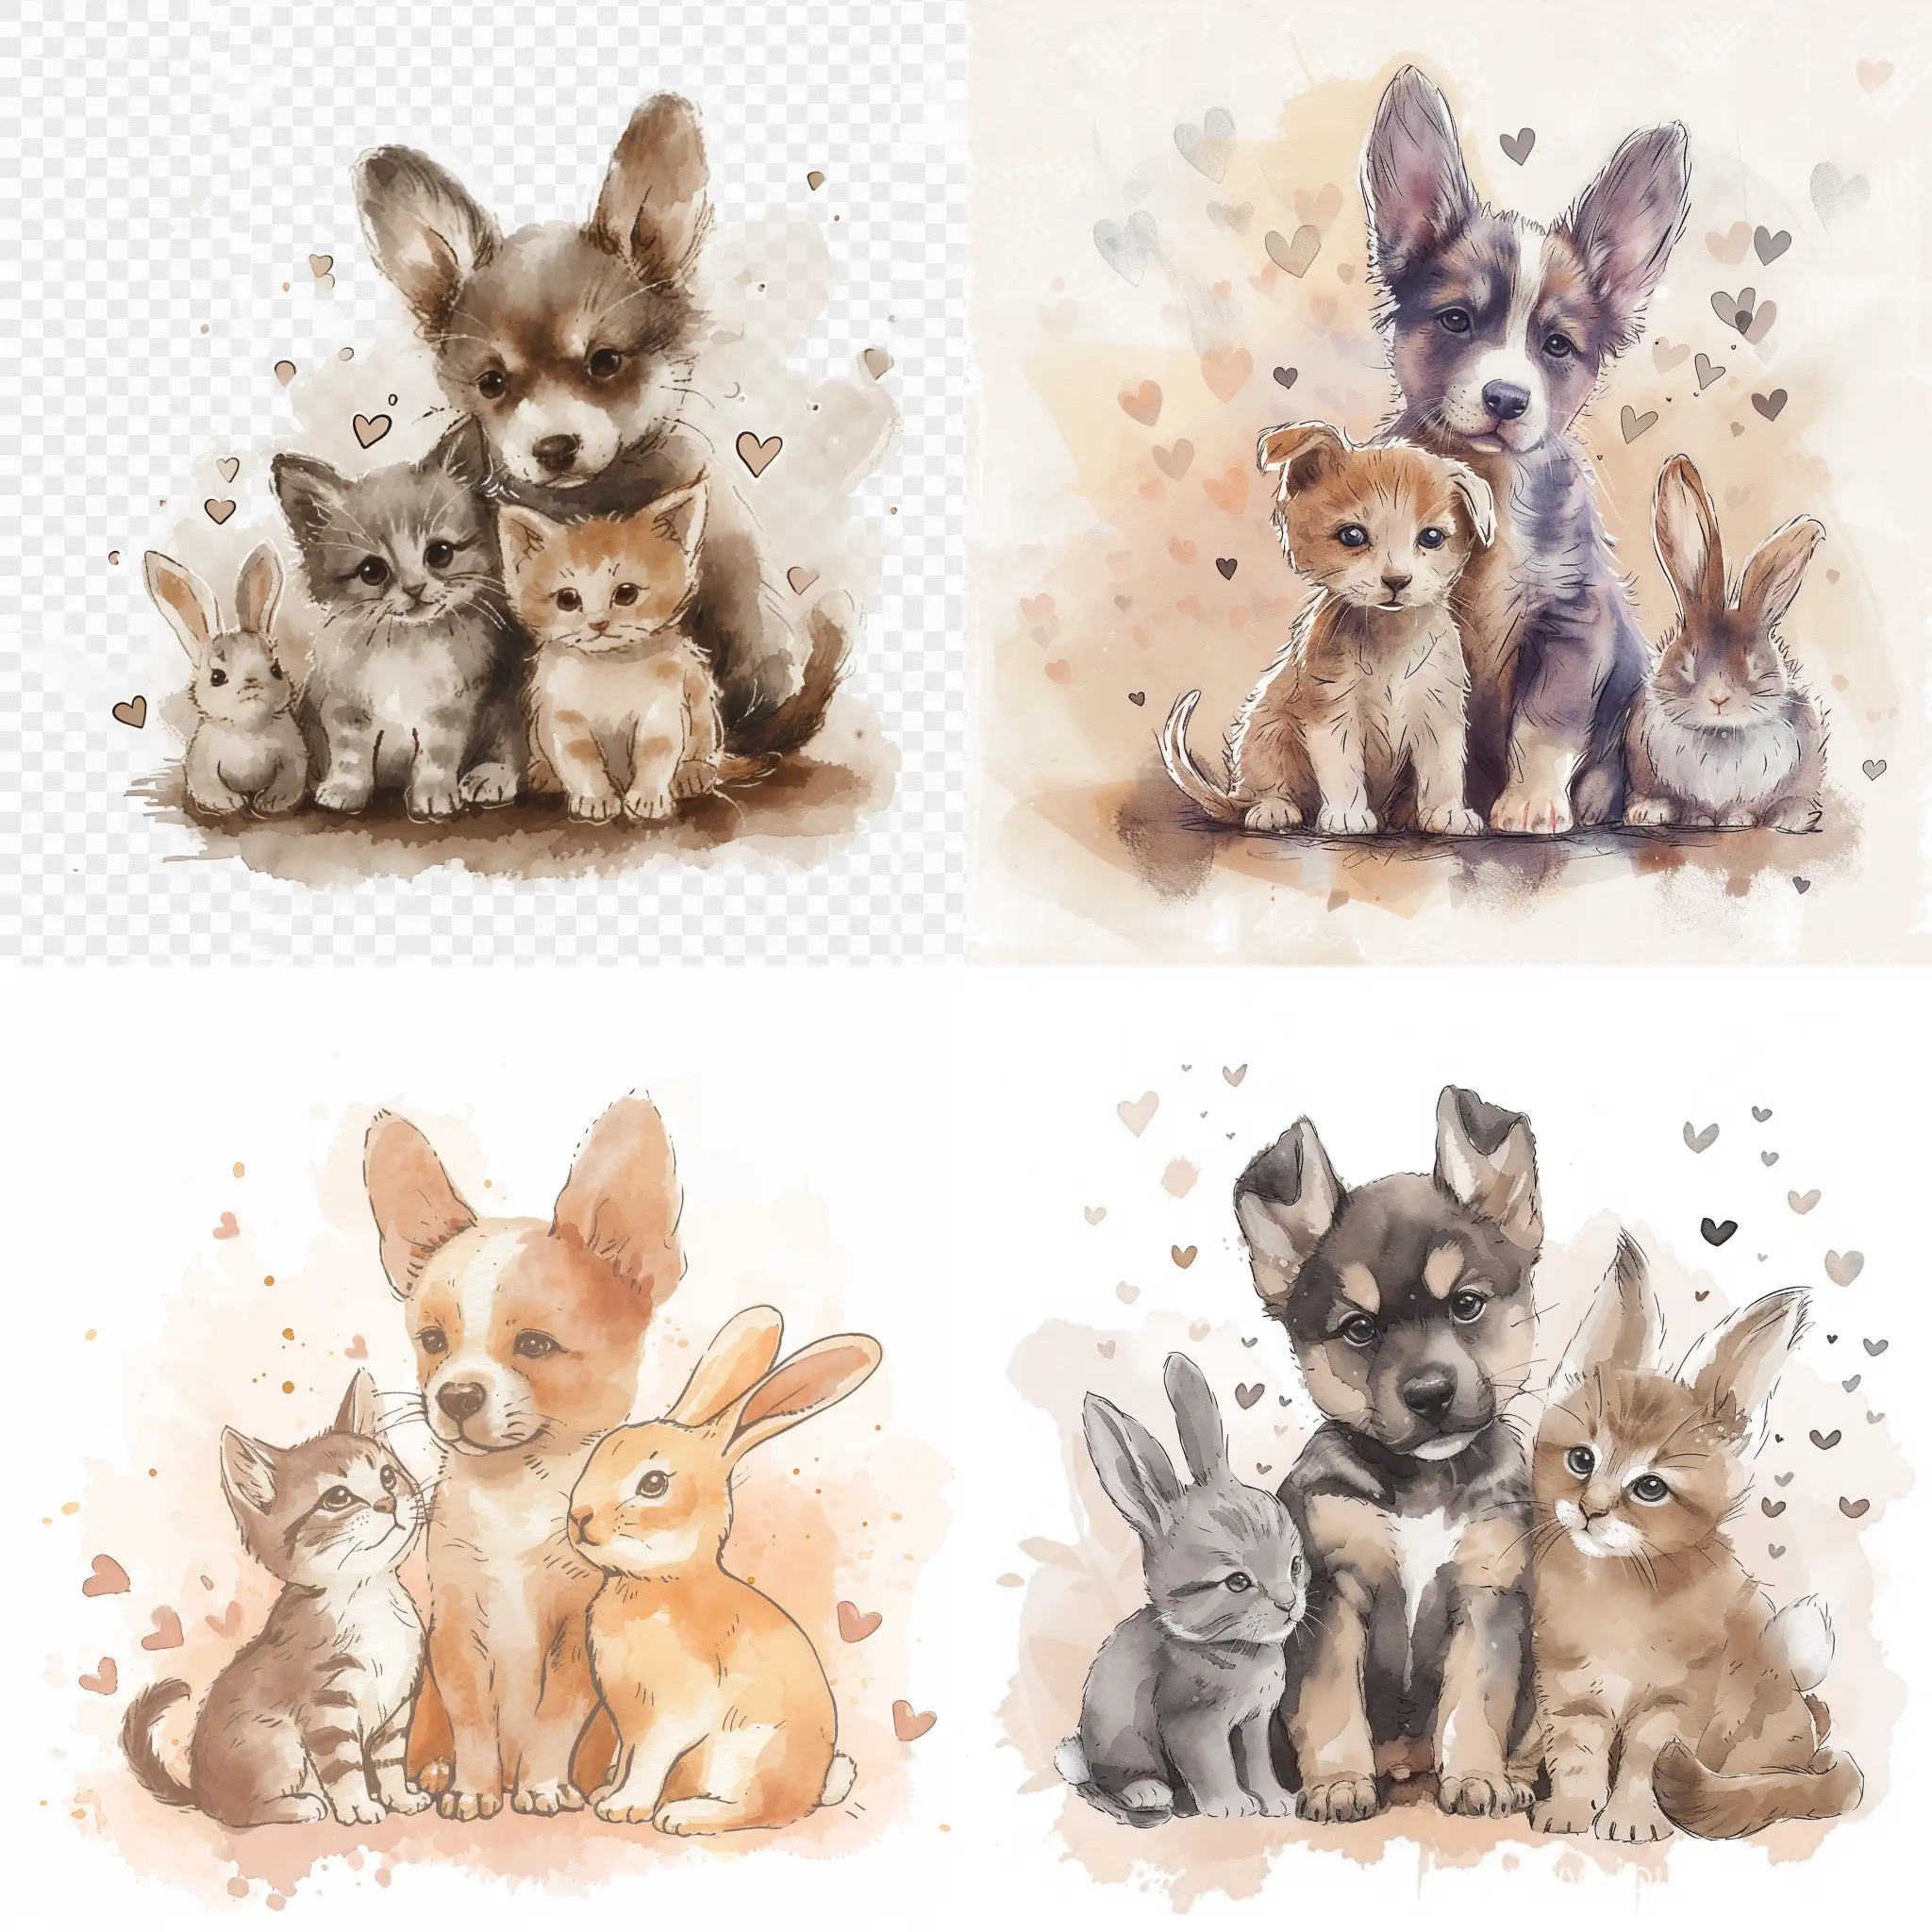 Adorable-Watercolor-Pets-Puppy-Kitten-and-Bunny-Harmony